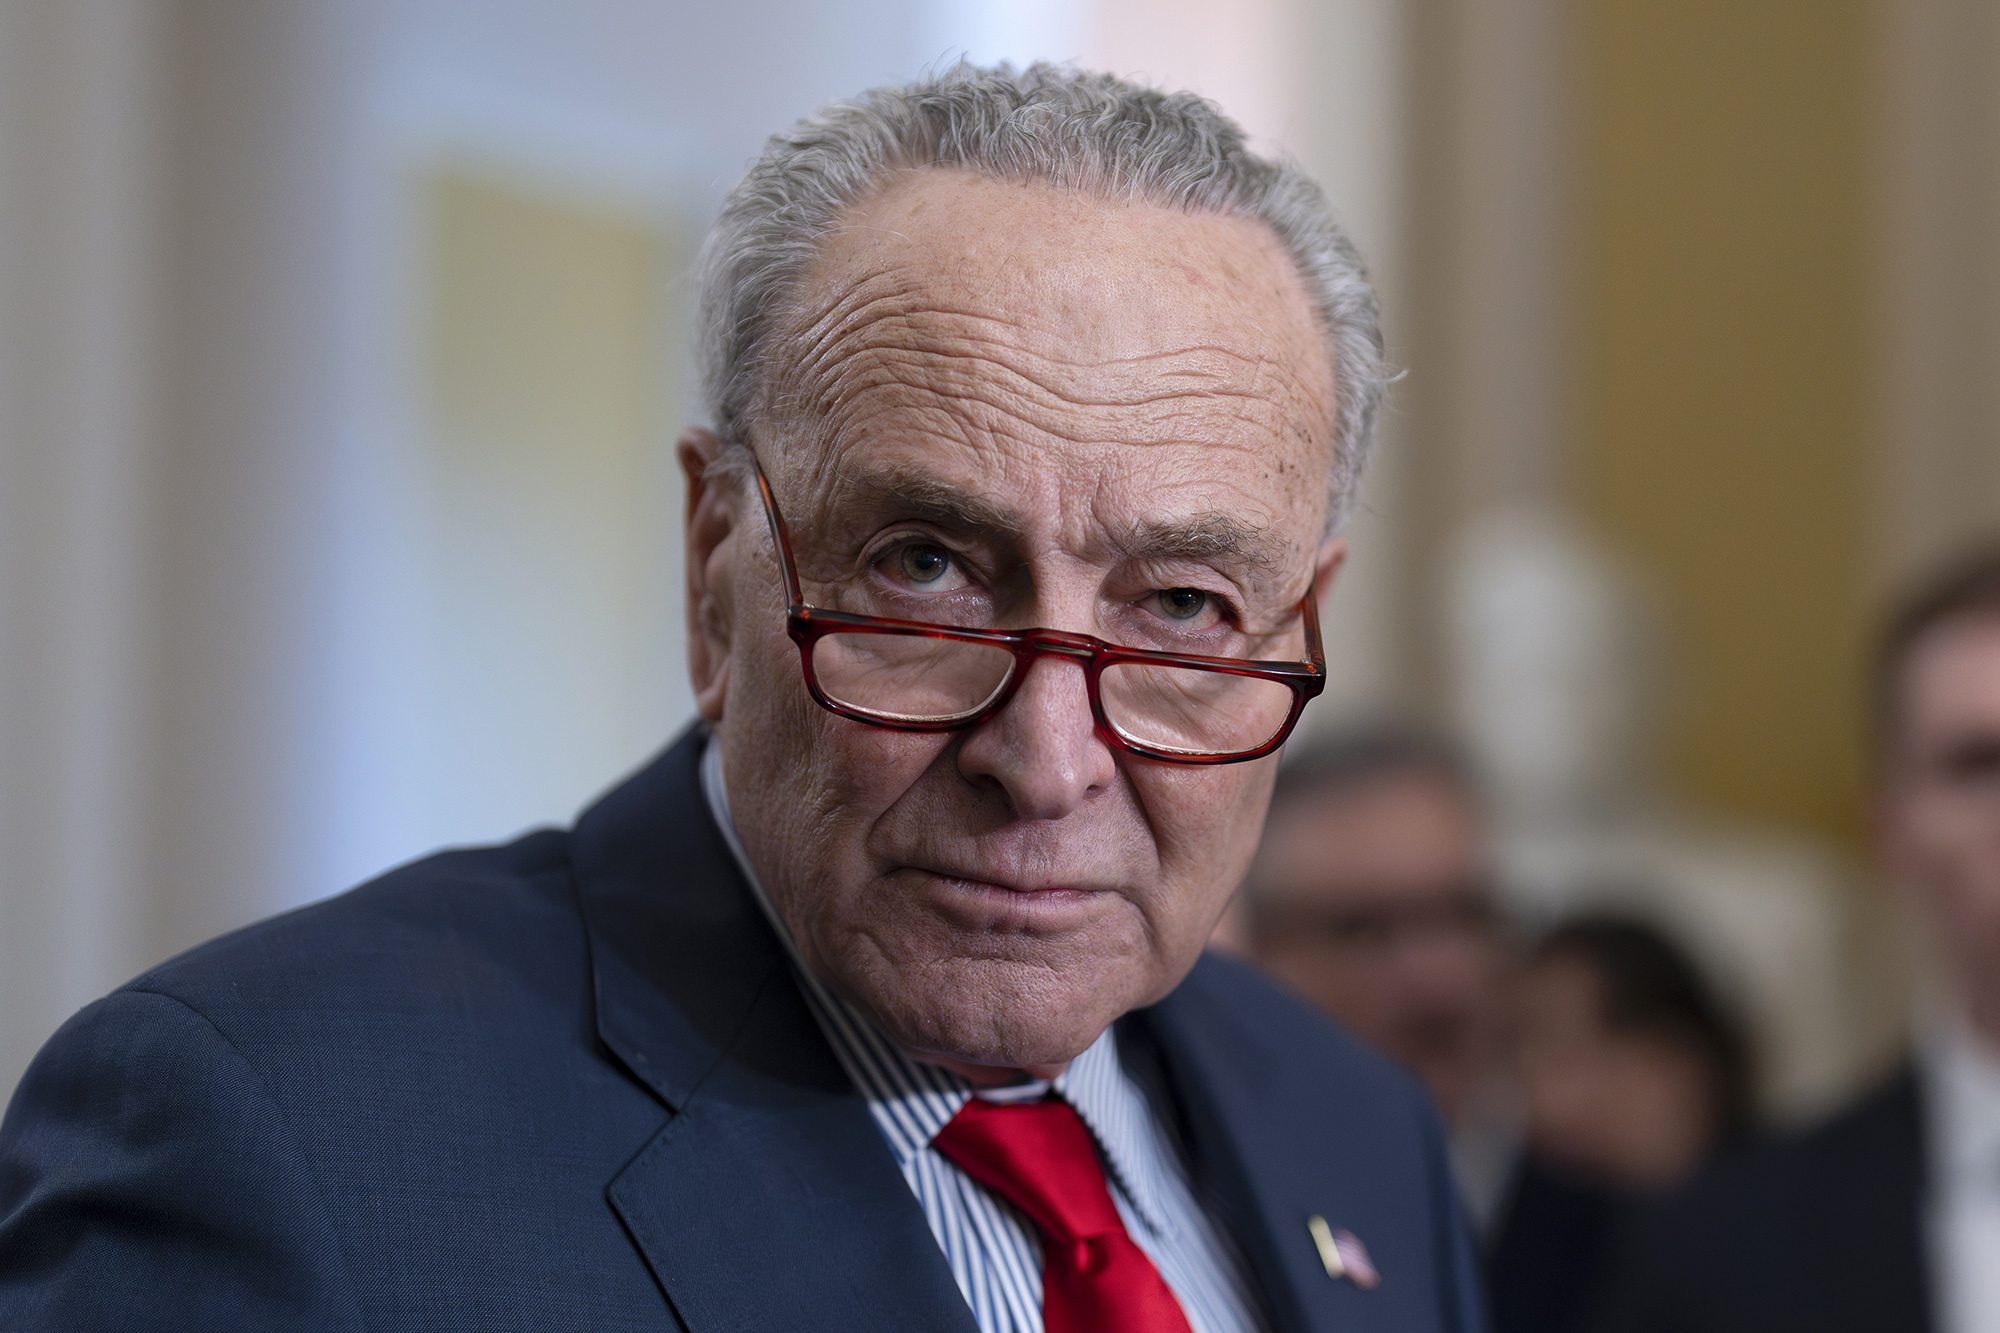 Senate Majority Leader Chuck Schumer speaks to reporters at the Capitol in Washington D.C, on March 12.